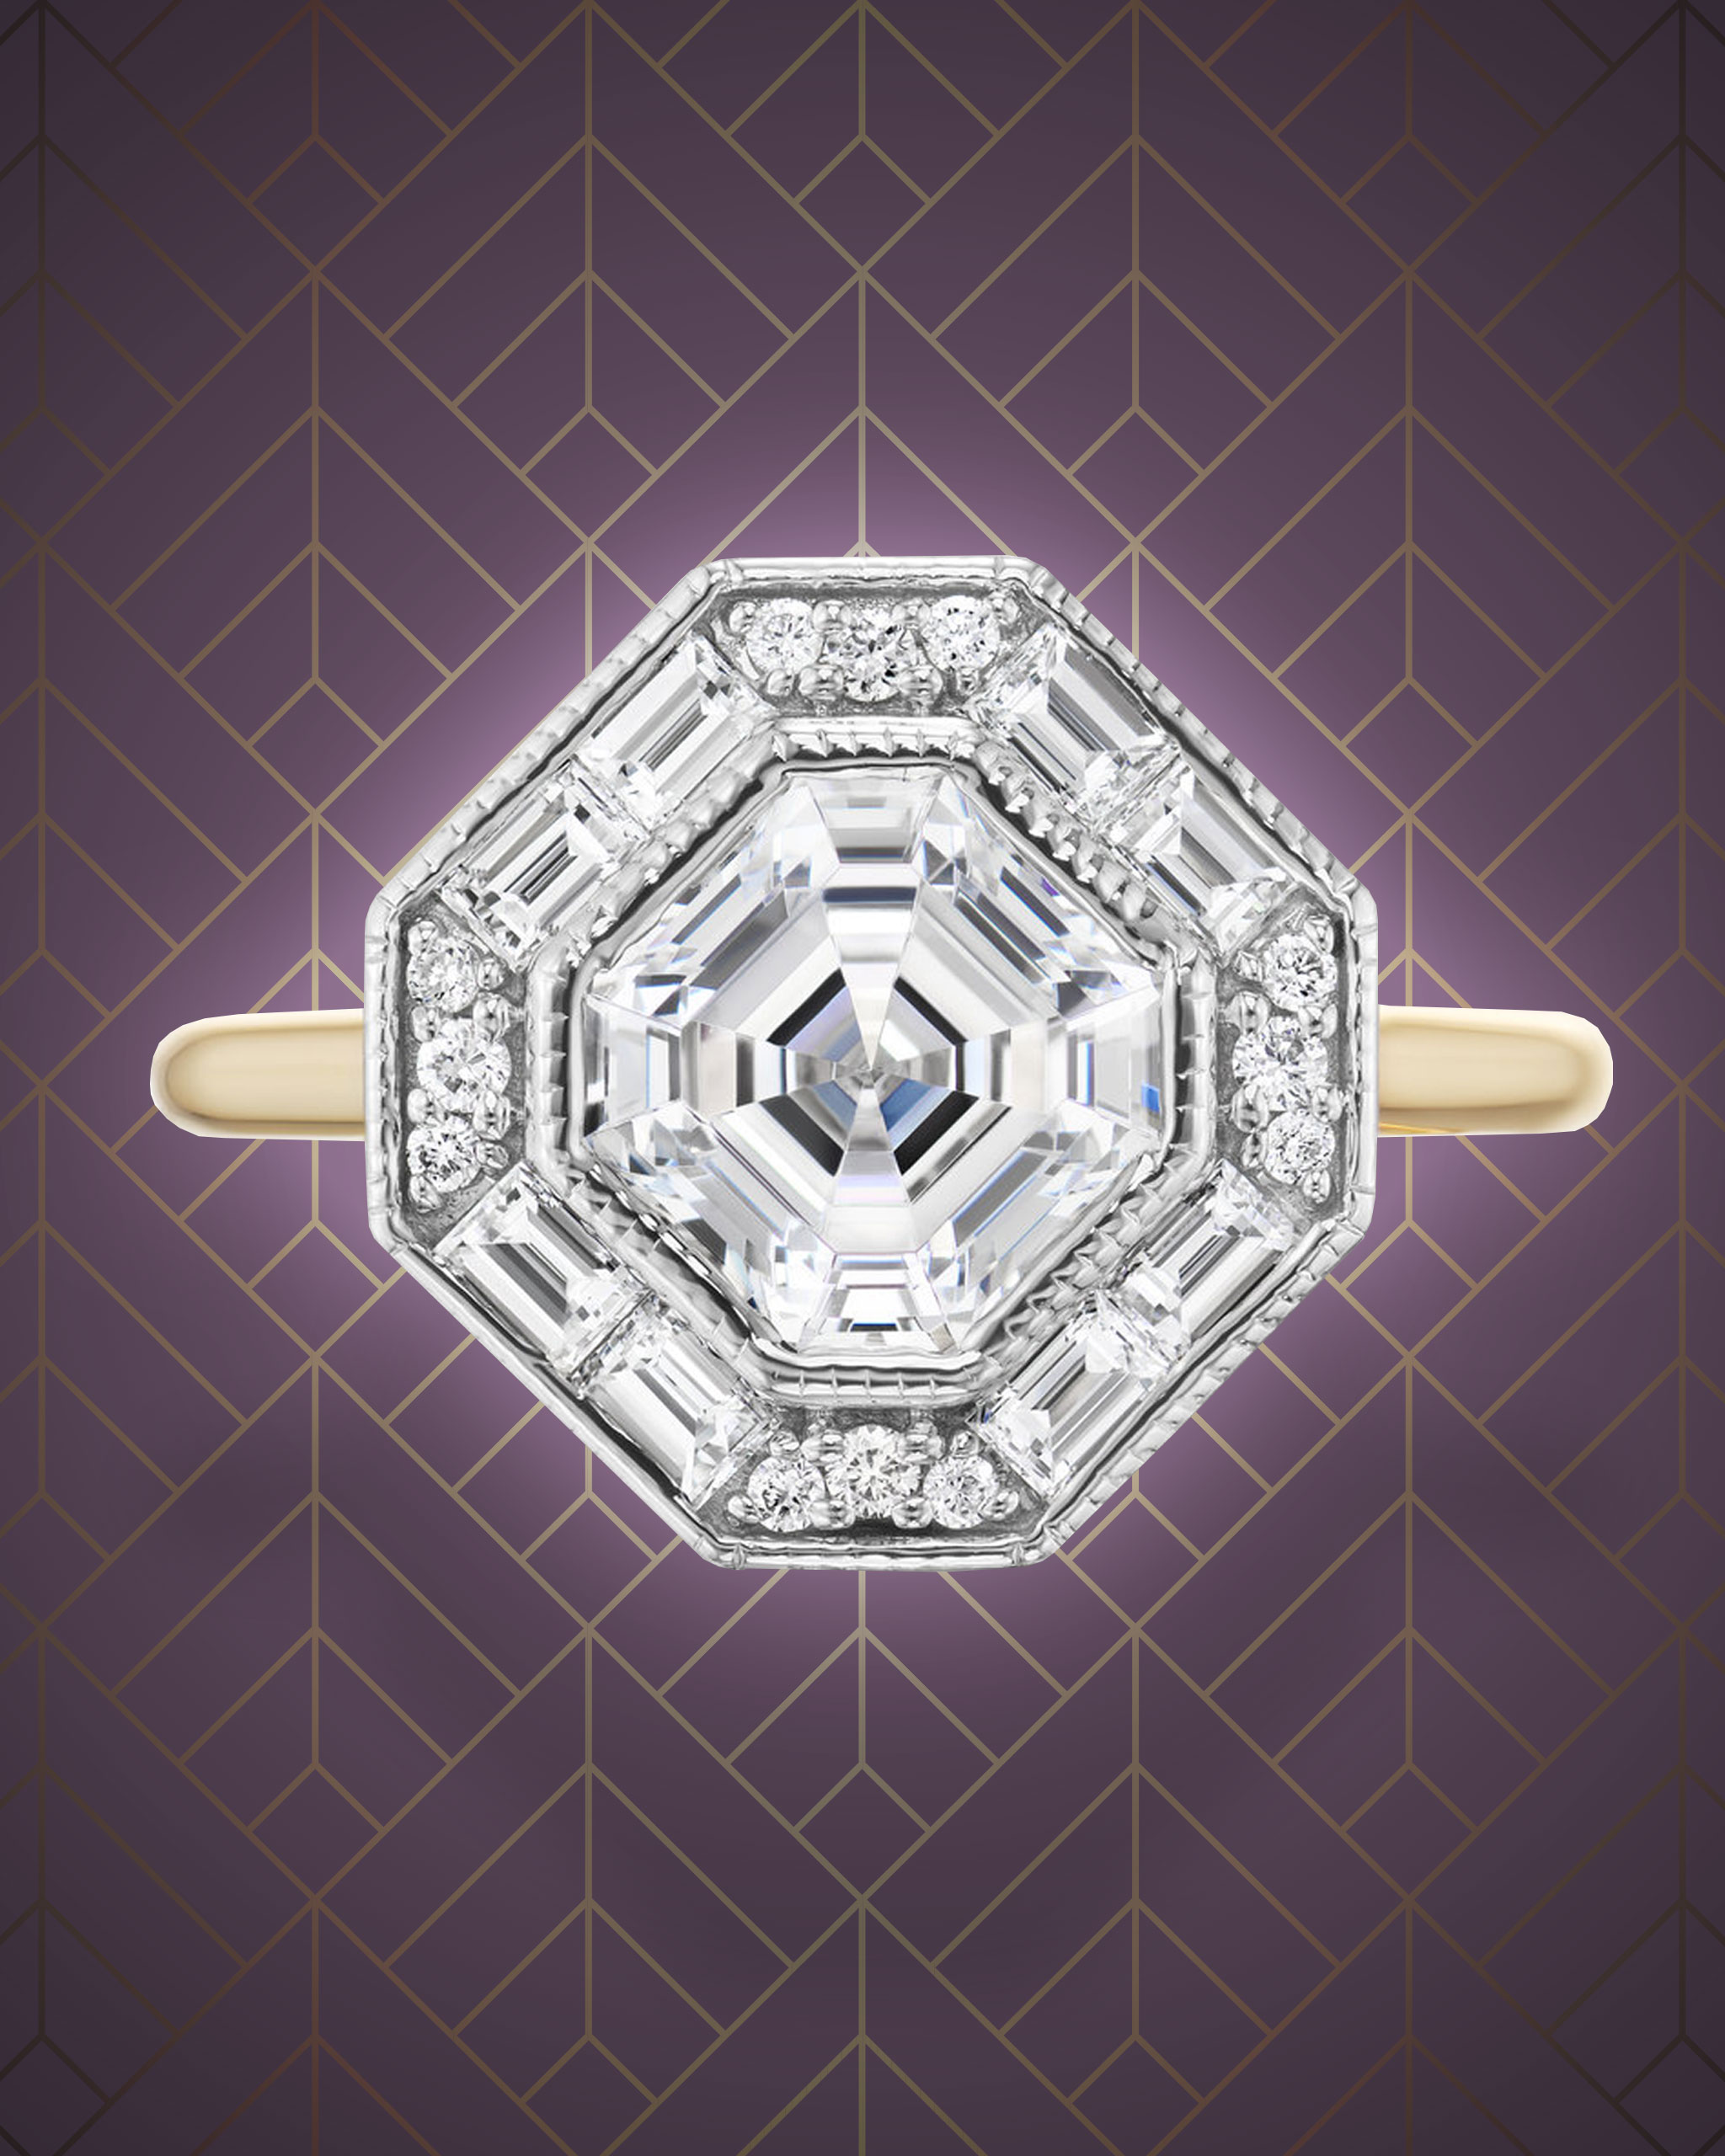 Asscher cut diamond Art Deco ring centered within round cut and baguette diamonds on a yellow gold band from Ashley Zhang